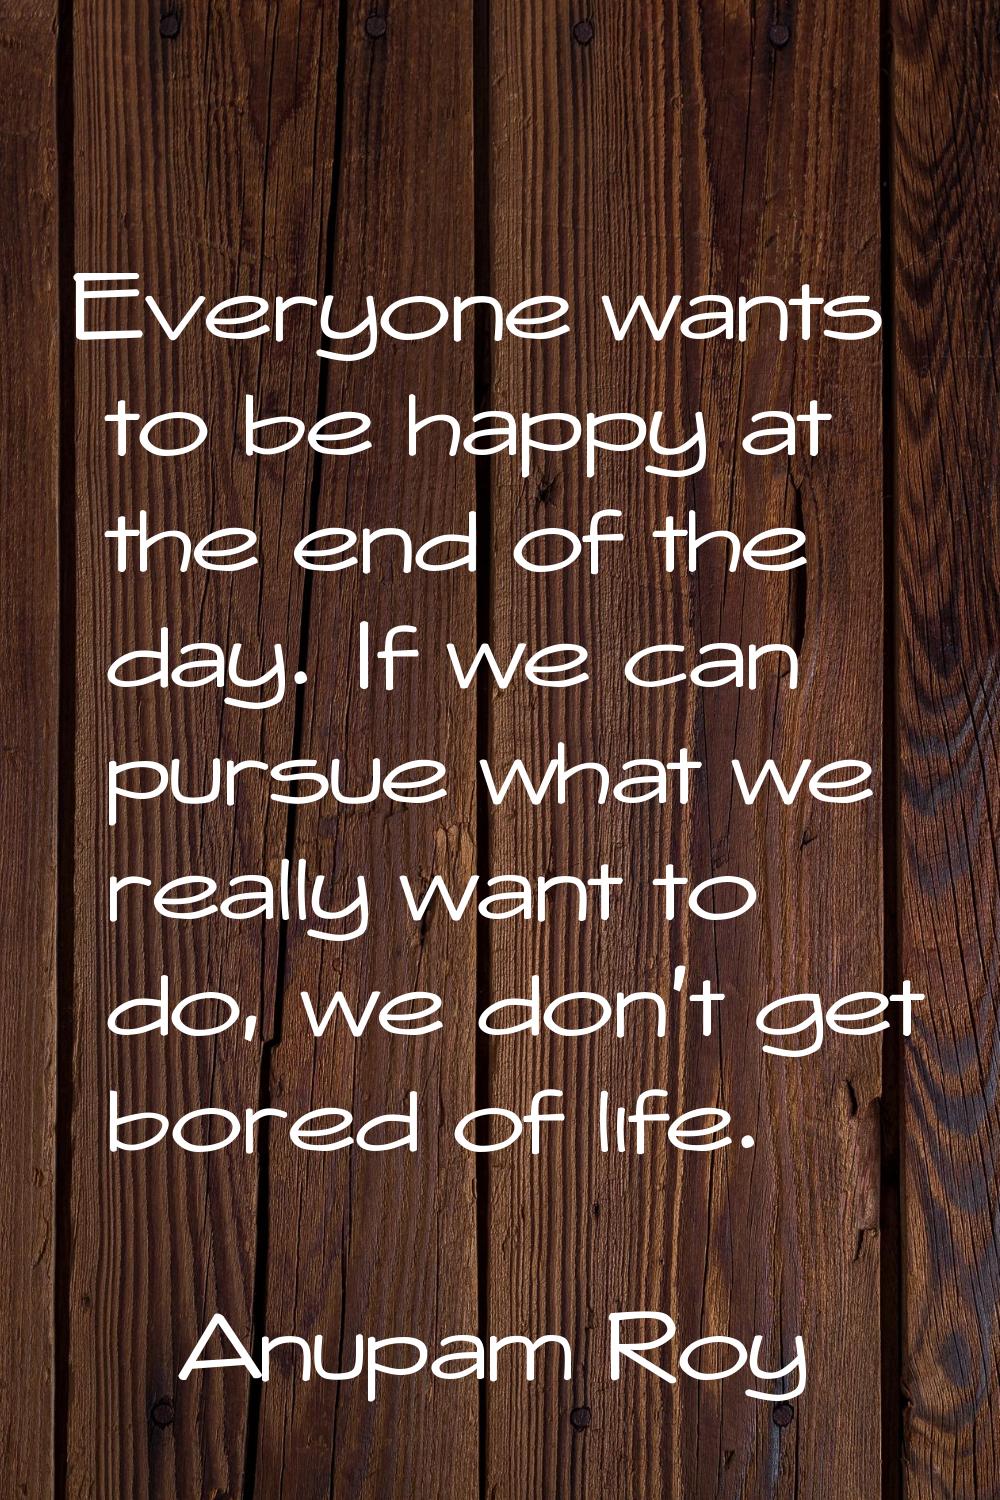 Everyone wants to be happy at the end of the day. If we can pursue what we really want to do, we do